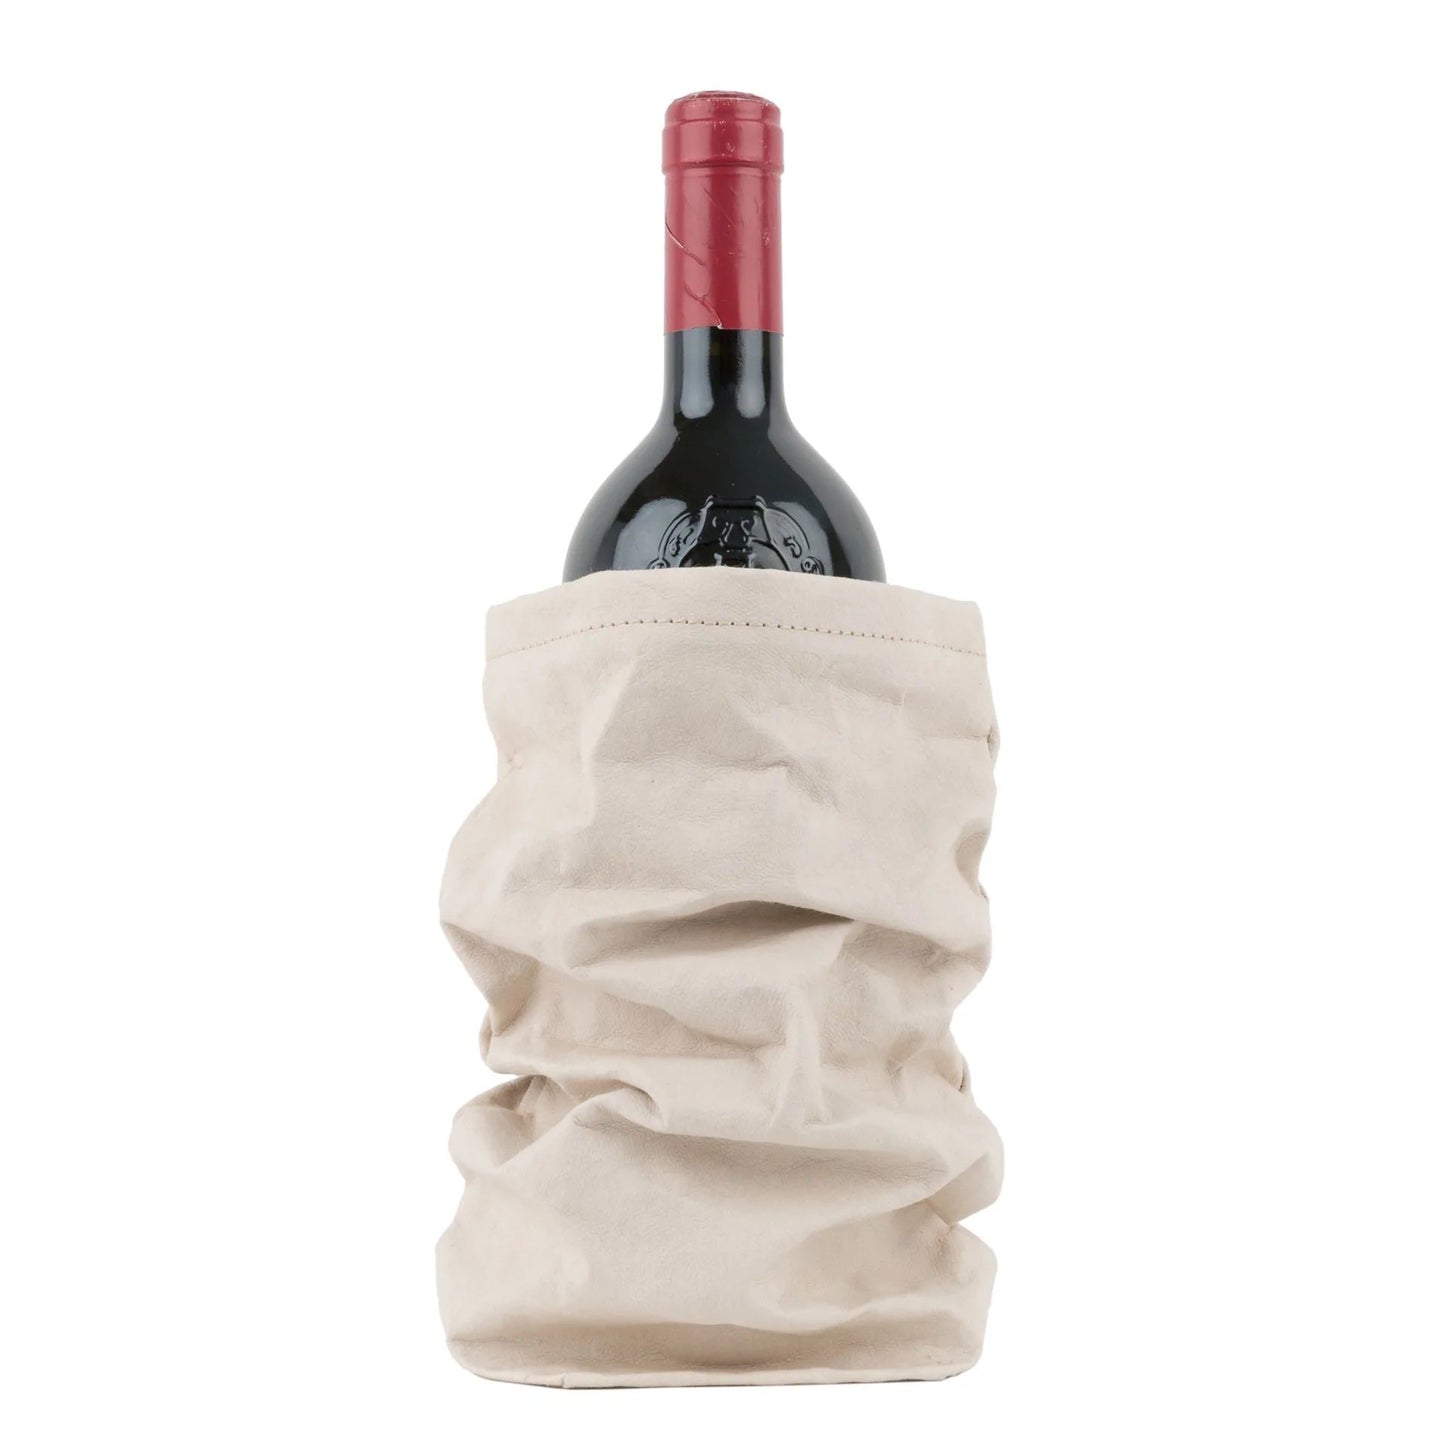 CHIANTI WINE BAG AND COOLER GIFT SET - READY TO SHIP